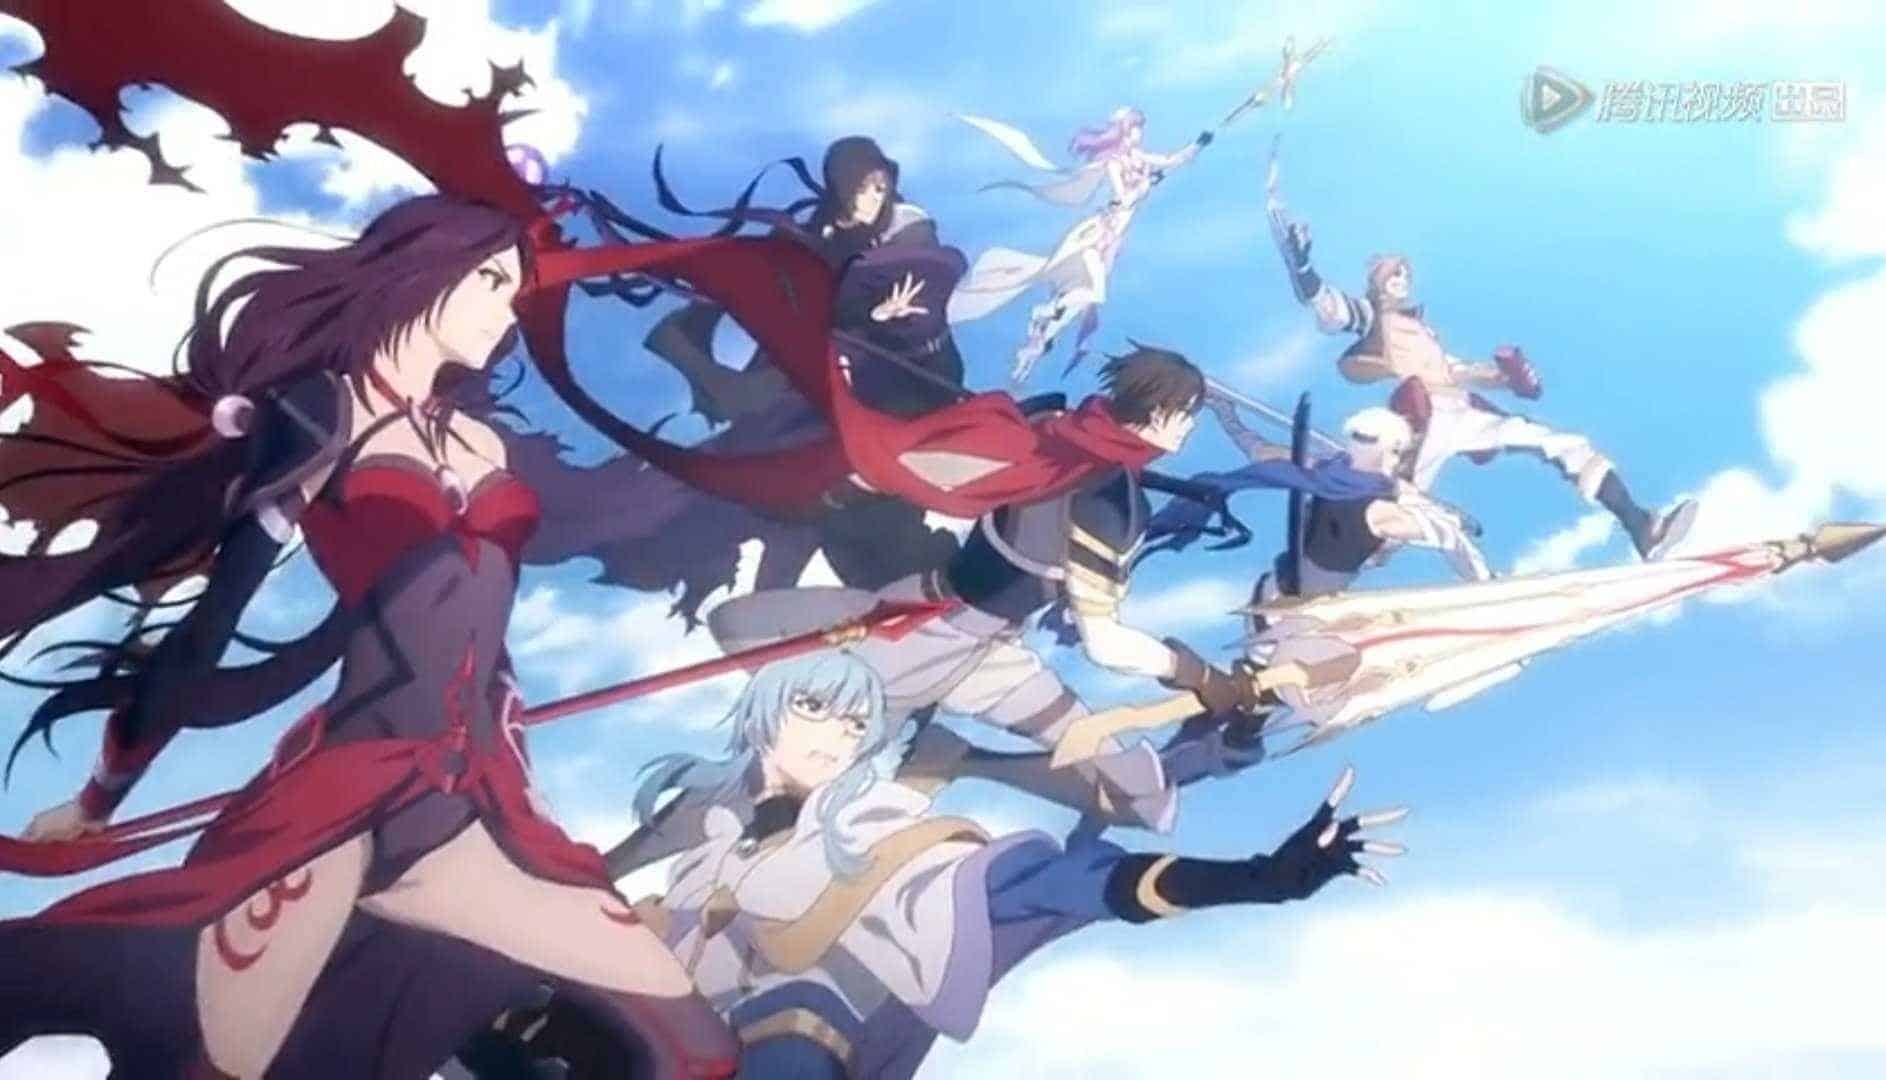 The Kings Avatar Season 2 Anime Review: The Preparation For War